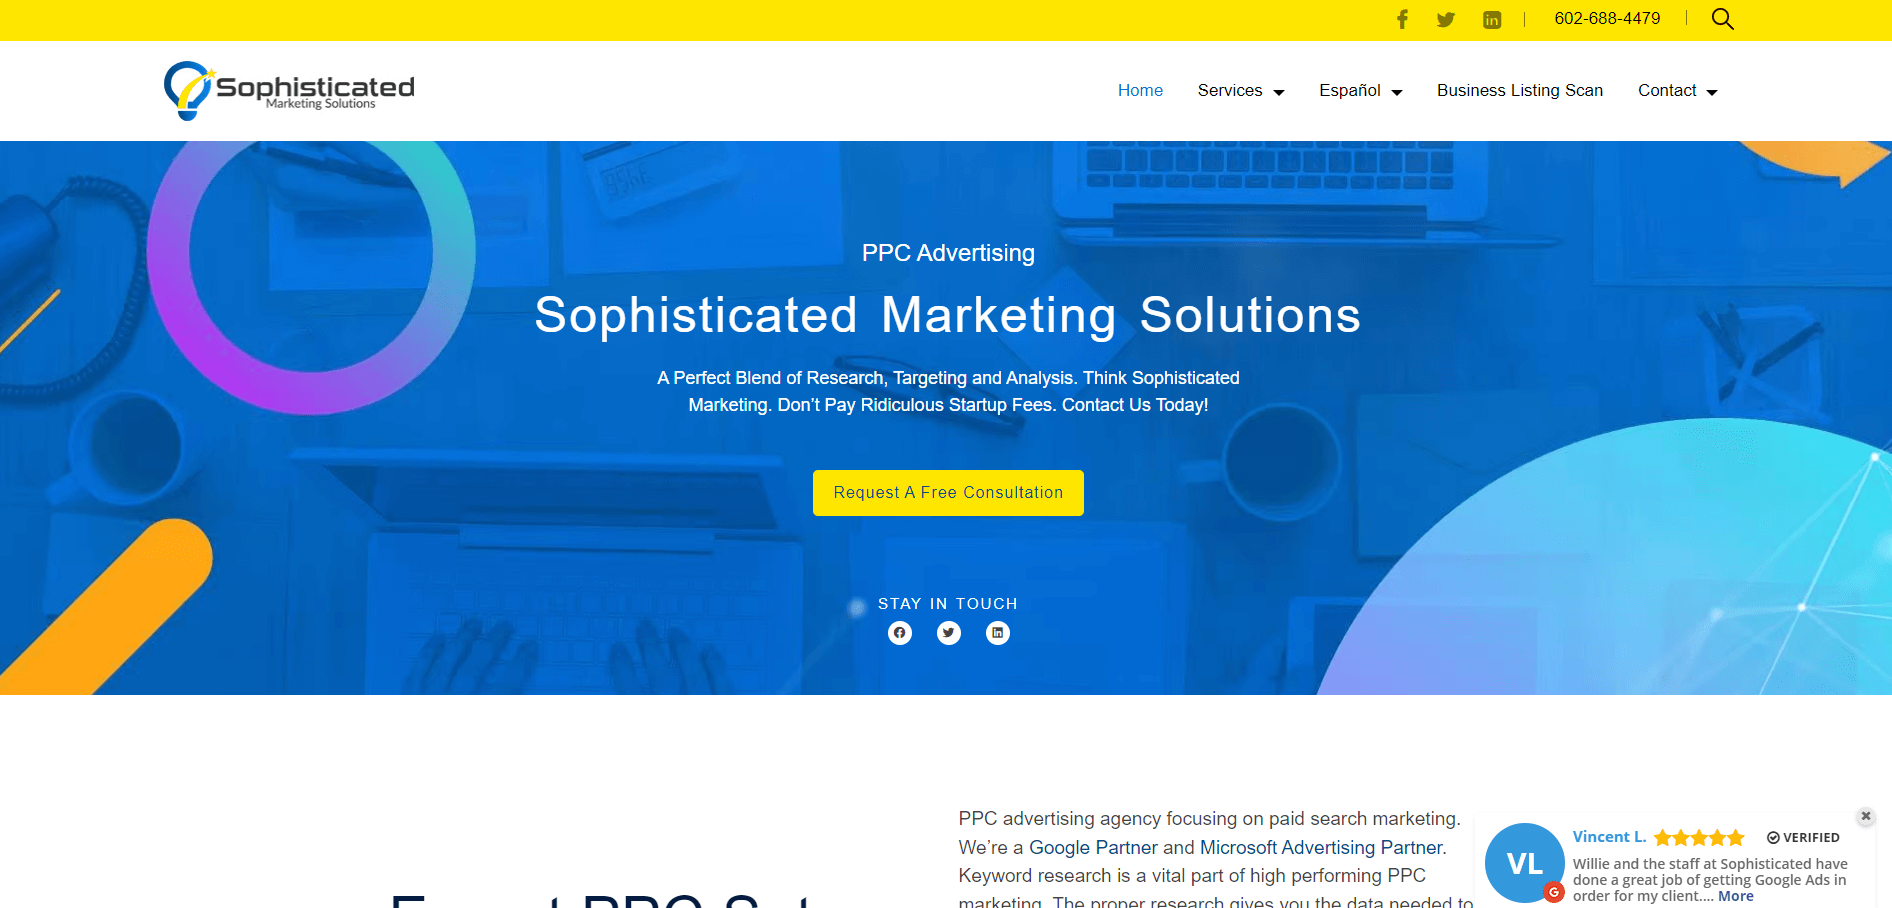 Sophisticated Marketing Solutions website